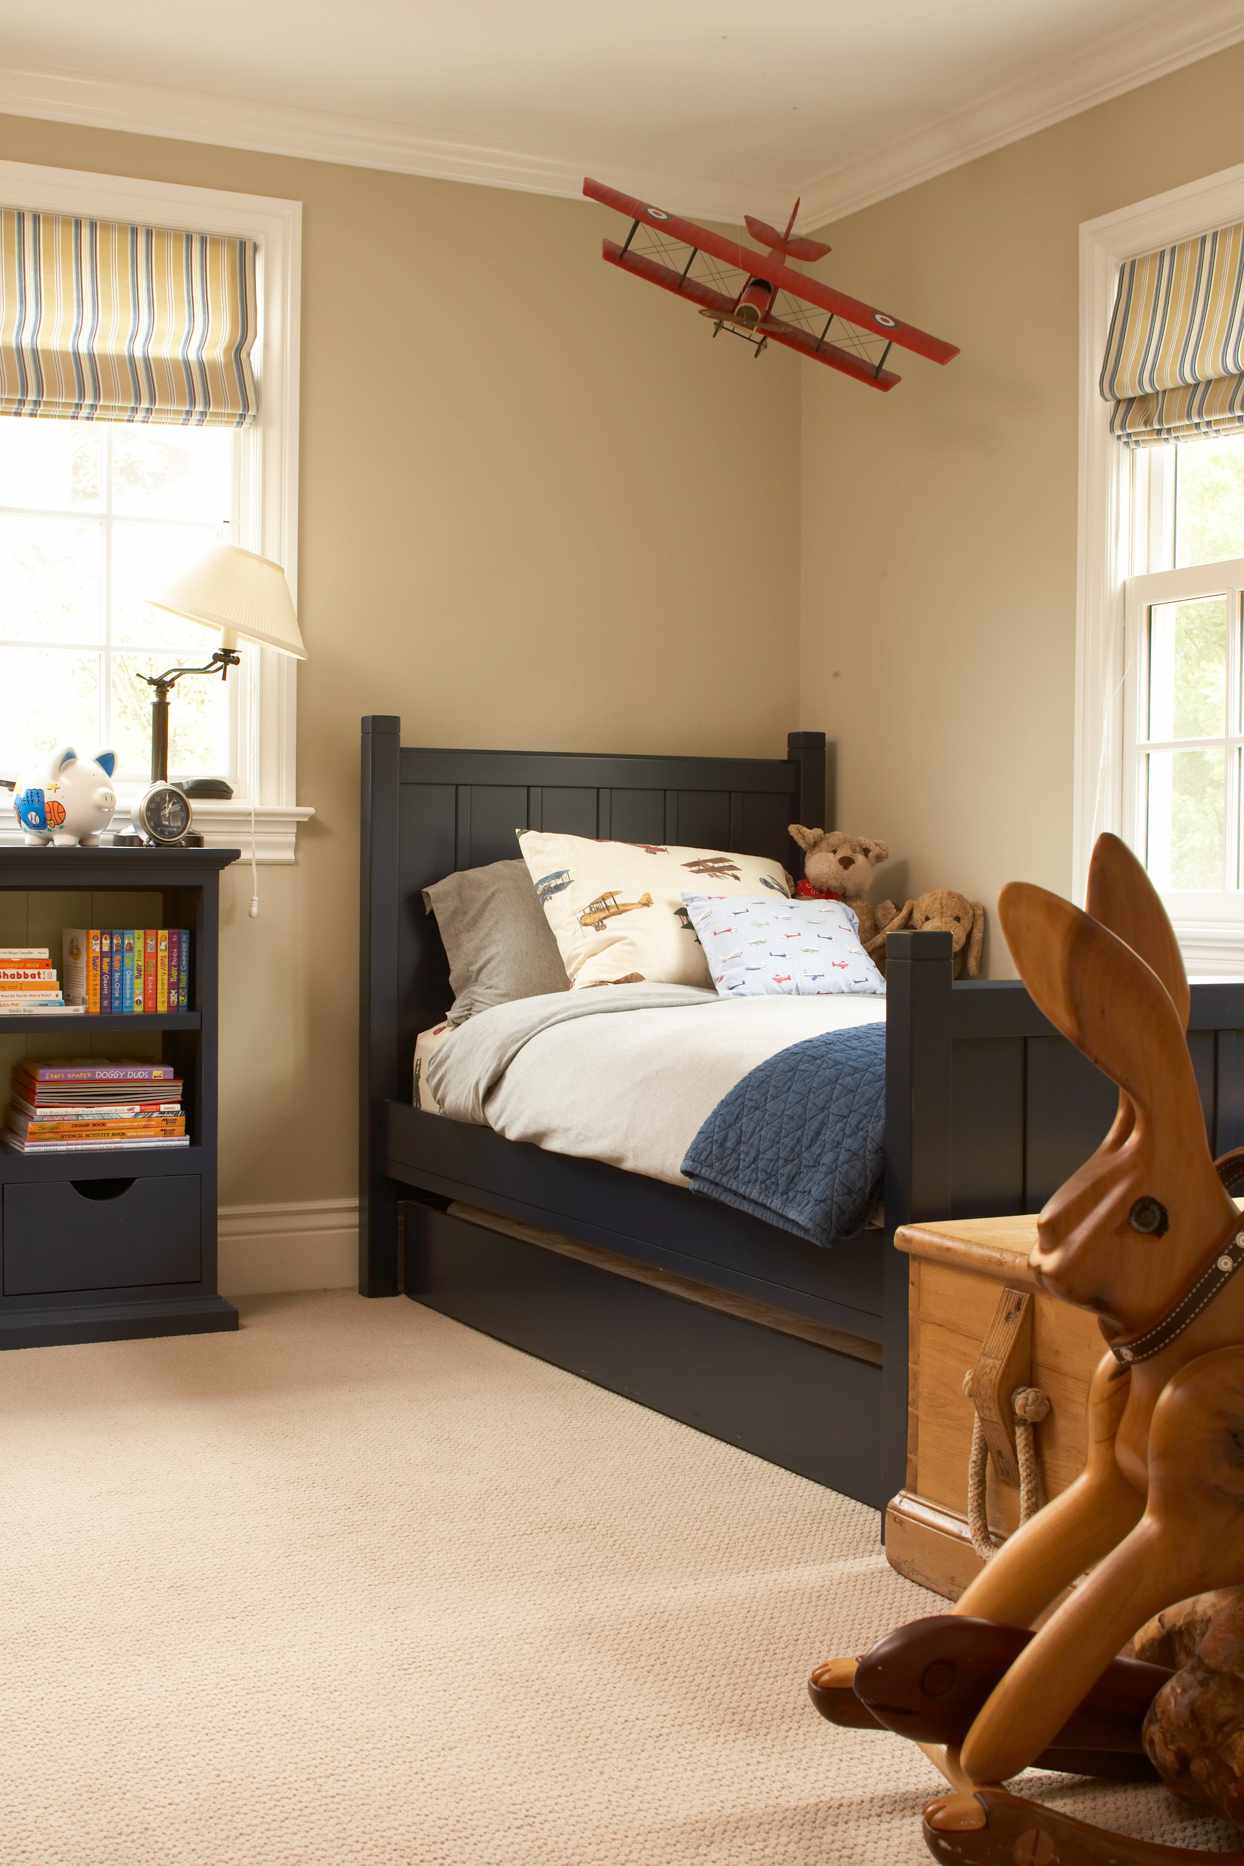 Decorate a Boy's Room With These Ideas   Better Homes & Gardens